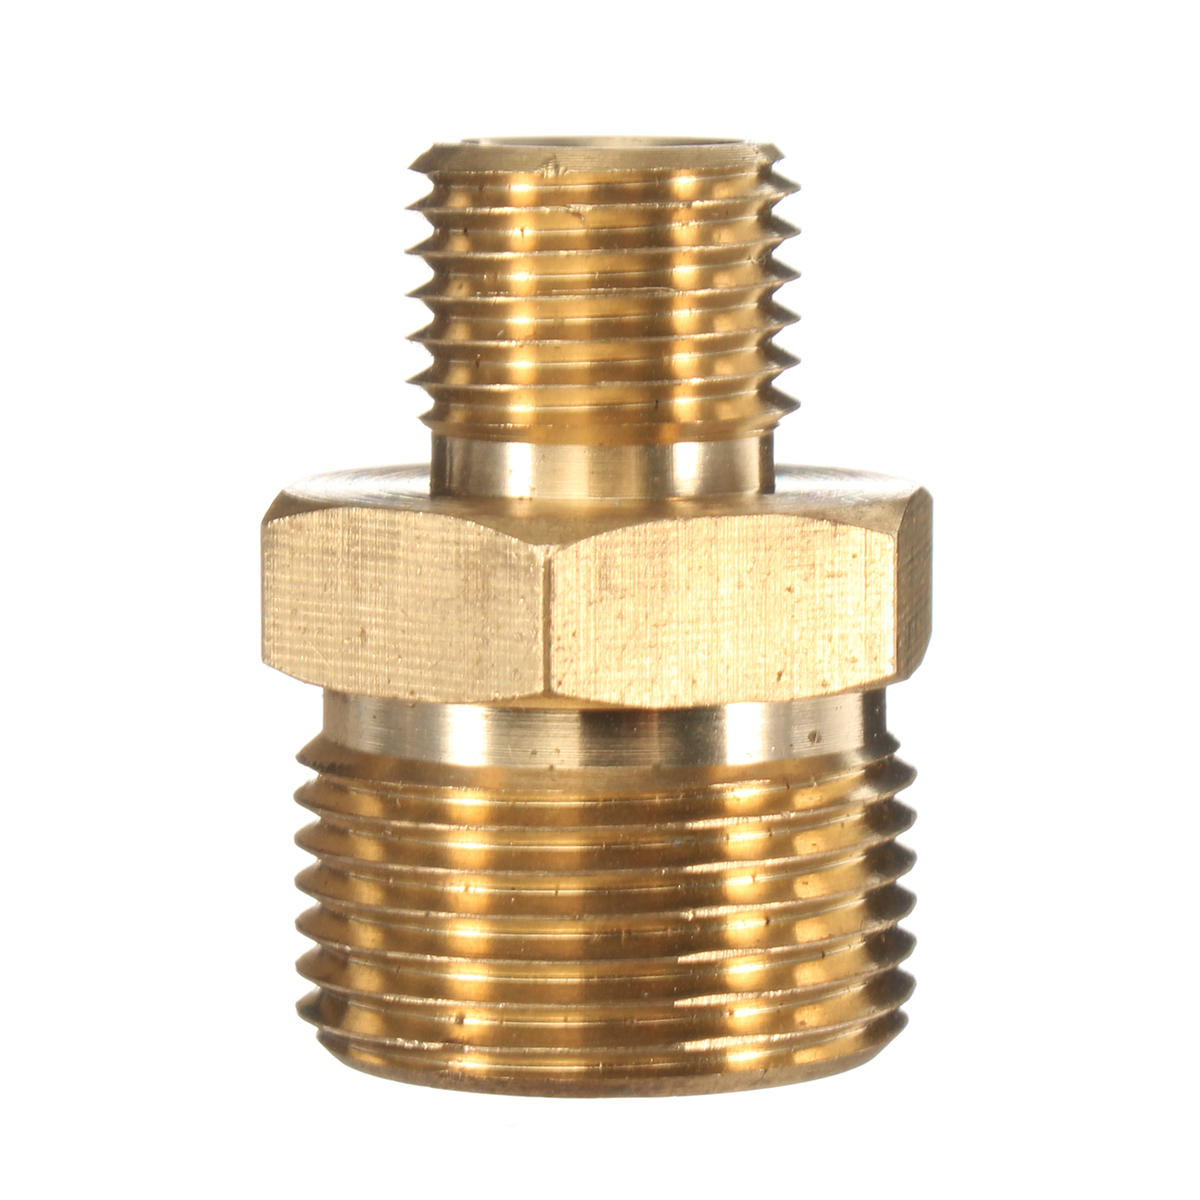 M22 male Coupling connector BRASS Pressure Washer hose adapter M22 male 